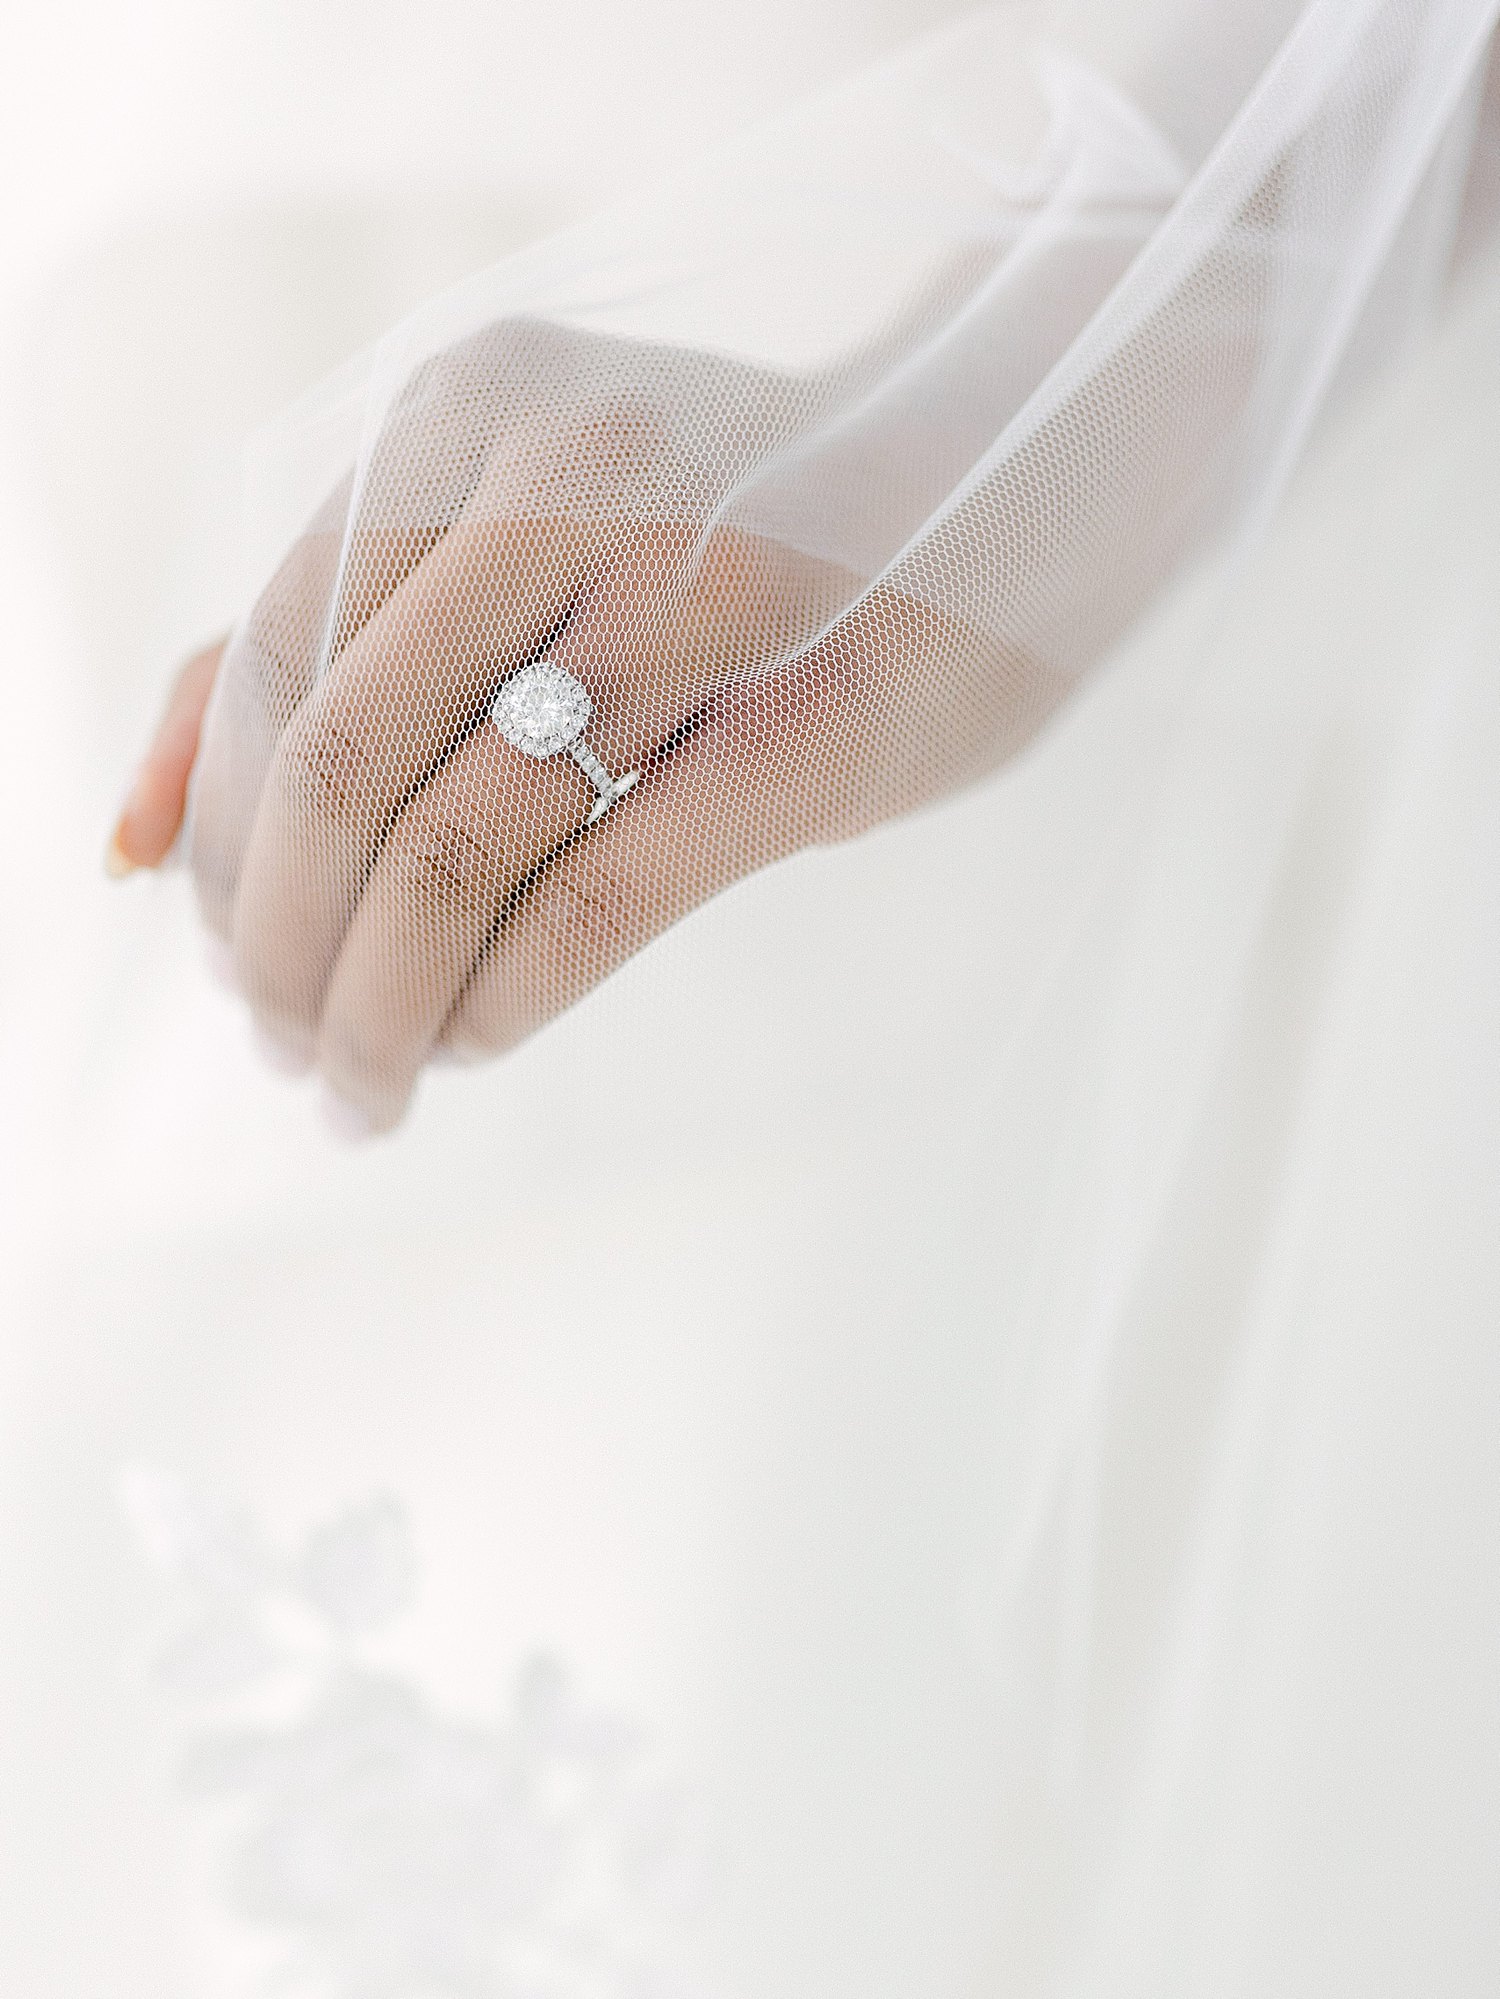 hand with diamond engagement ring under veil